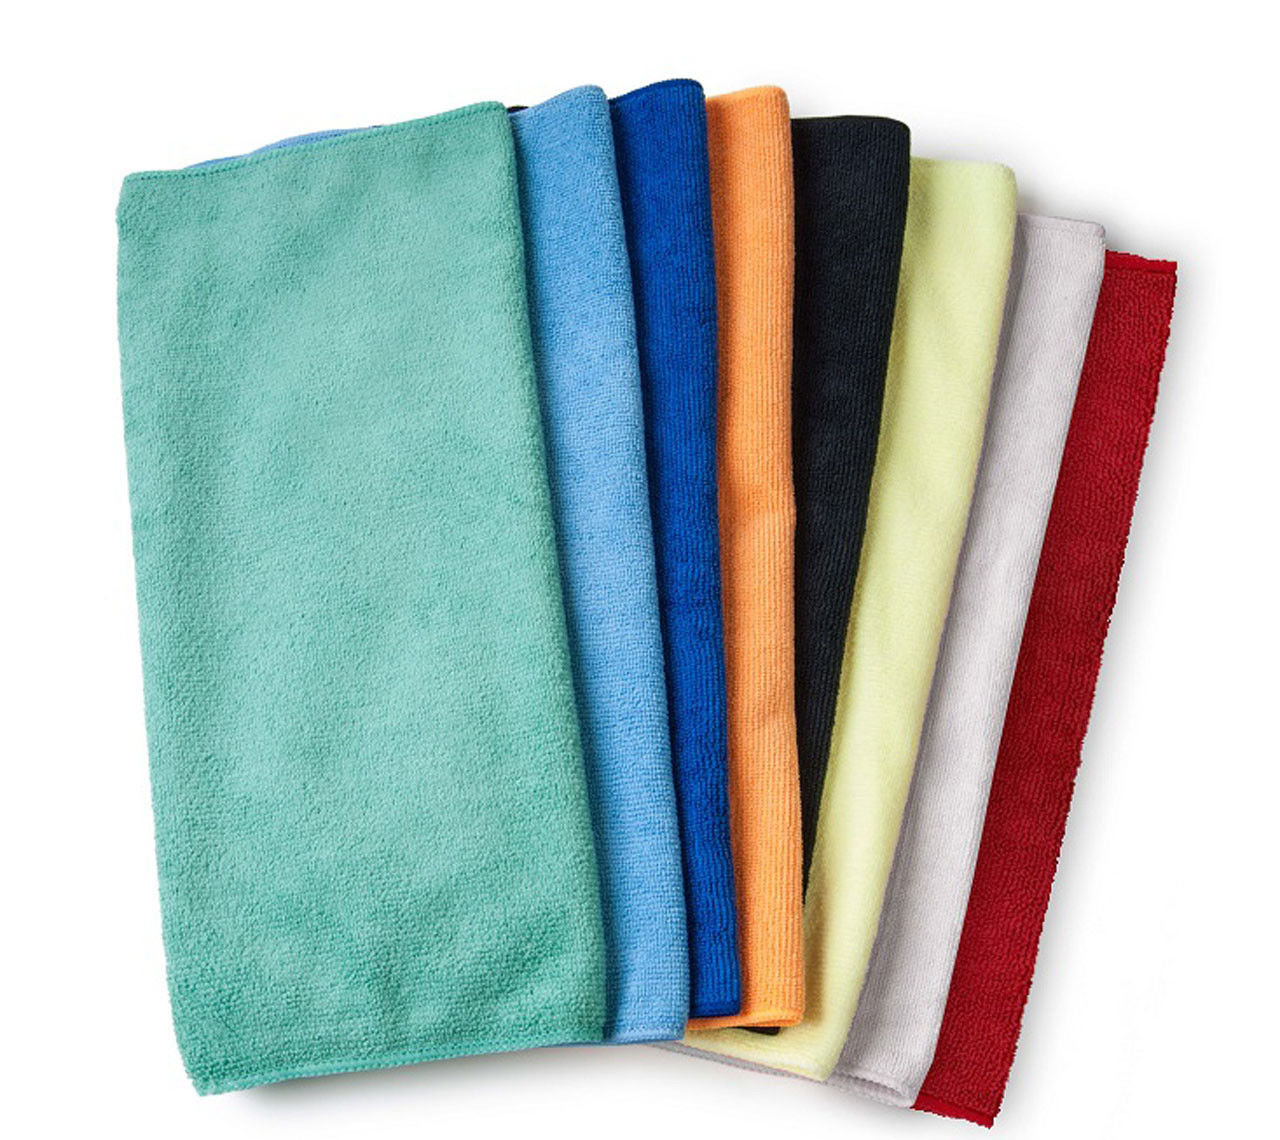 Do bulk golf towels come with grommets or hooks included?